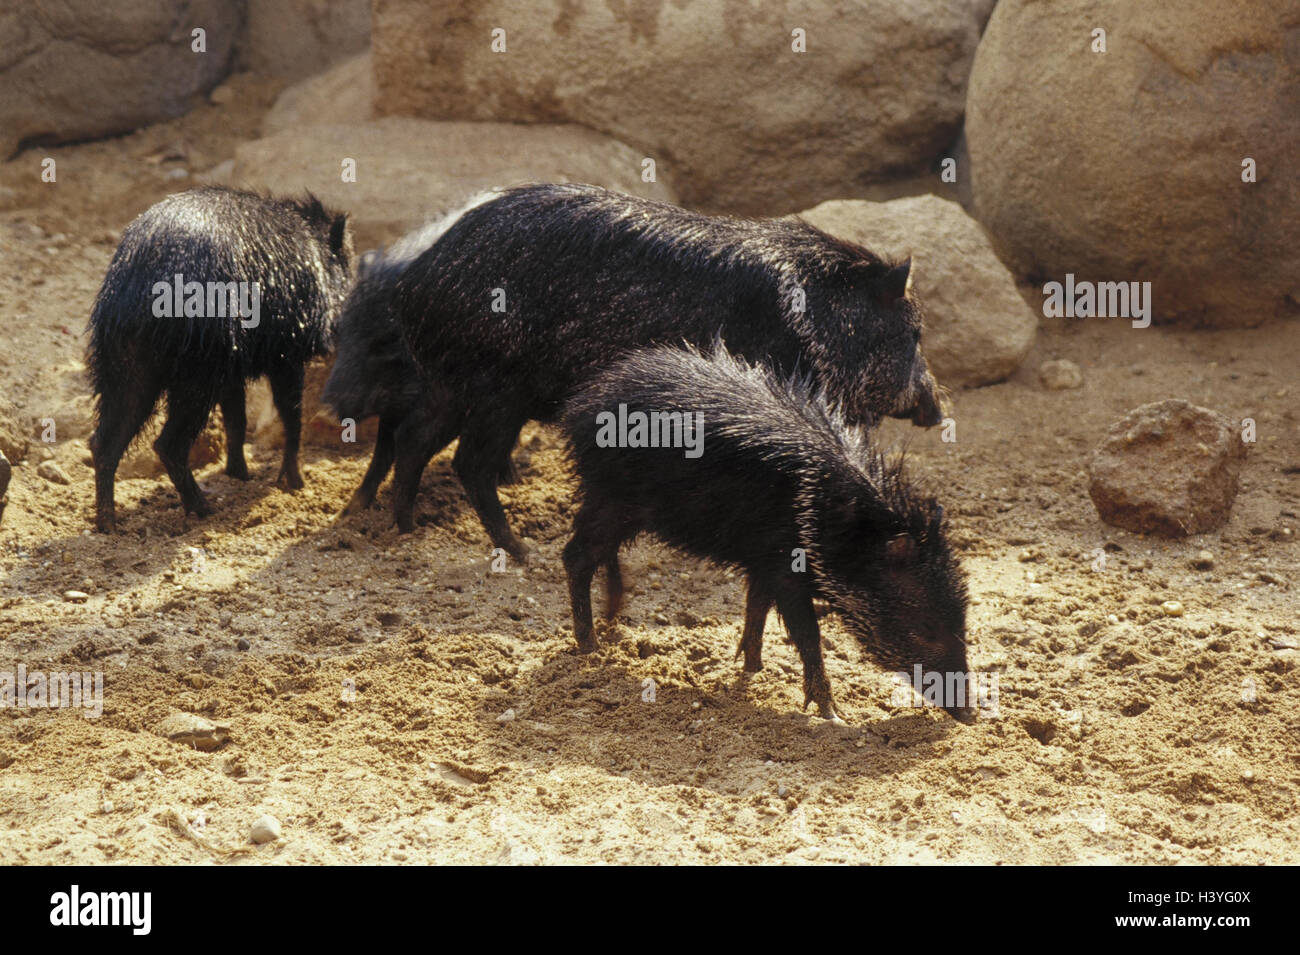 Zoo, Halbandpekaris, Tayassu tajacu, mother animal, young animals, outside, animals, zoo animals, belly-button pigs, new world pigs, wild animals, mammals, whole bodies, preview Stock Photo